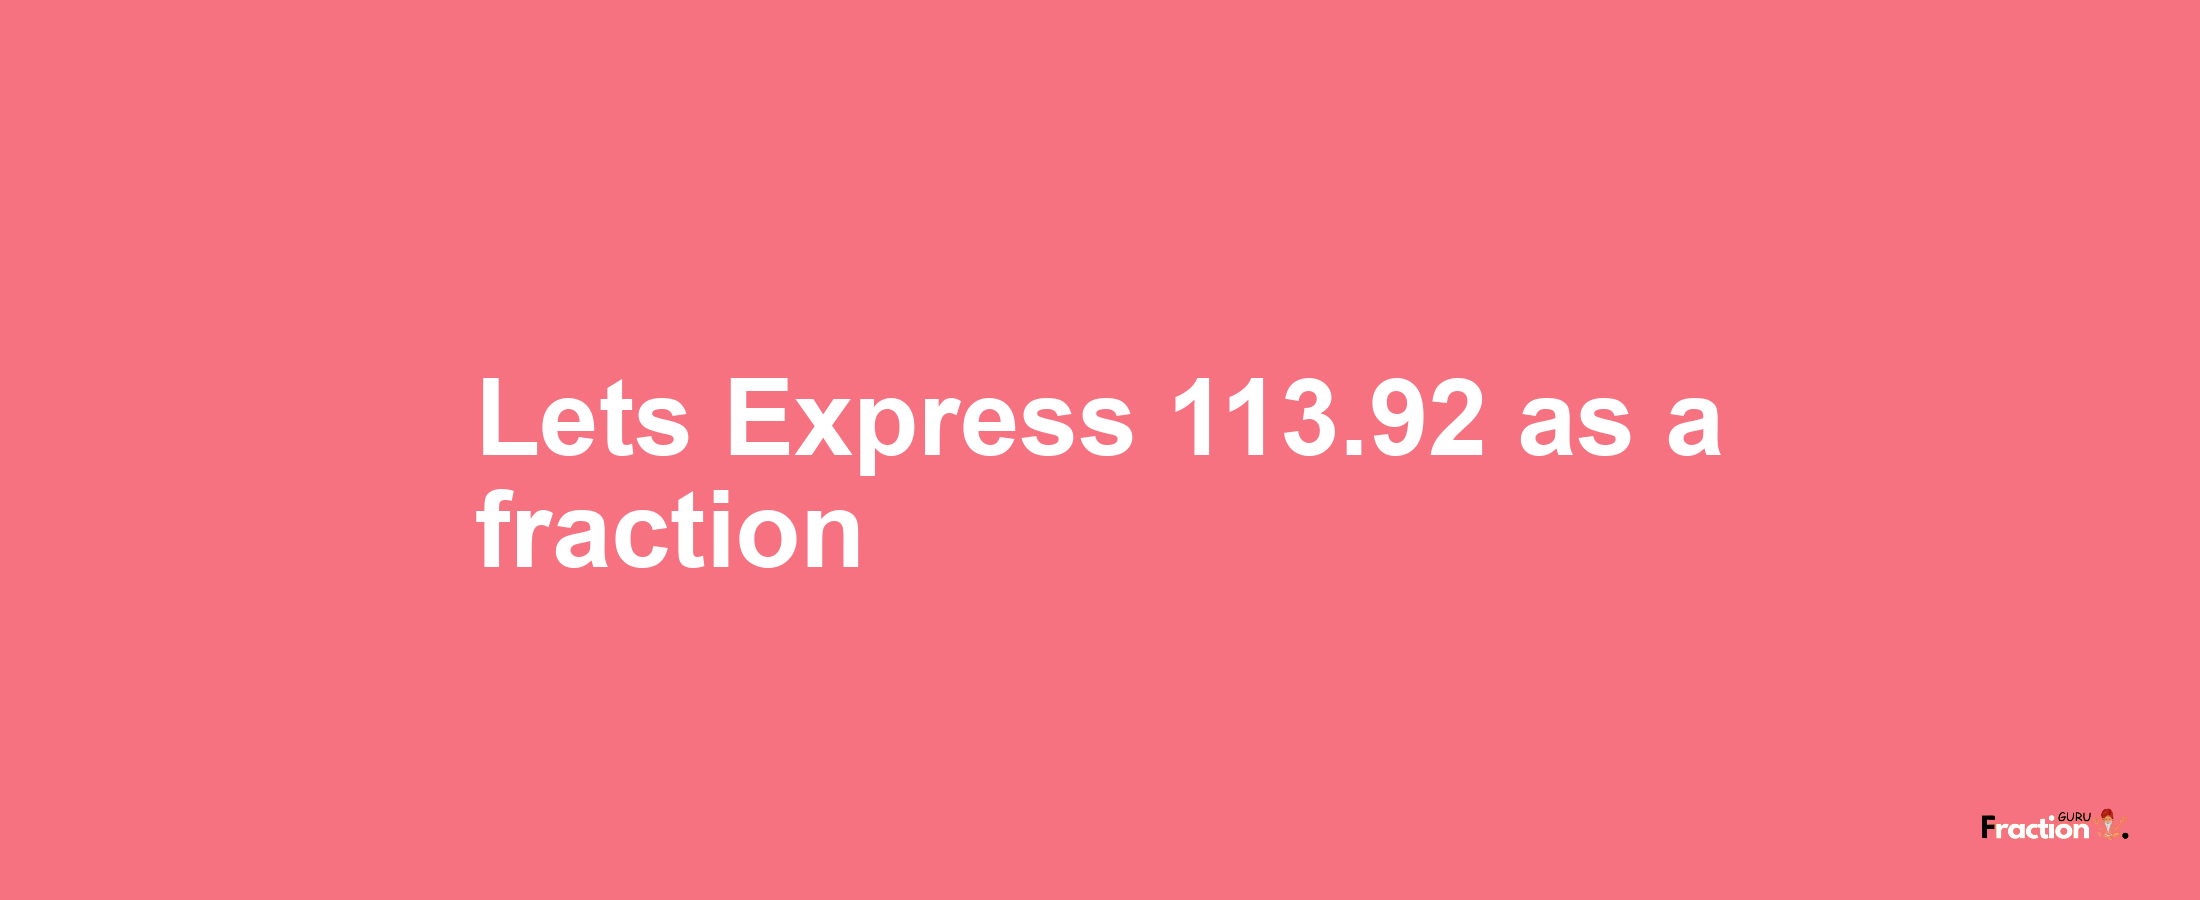 Lets Express 113.92 as afraction